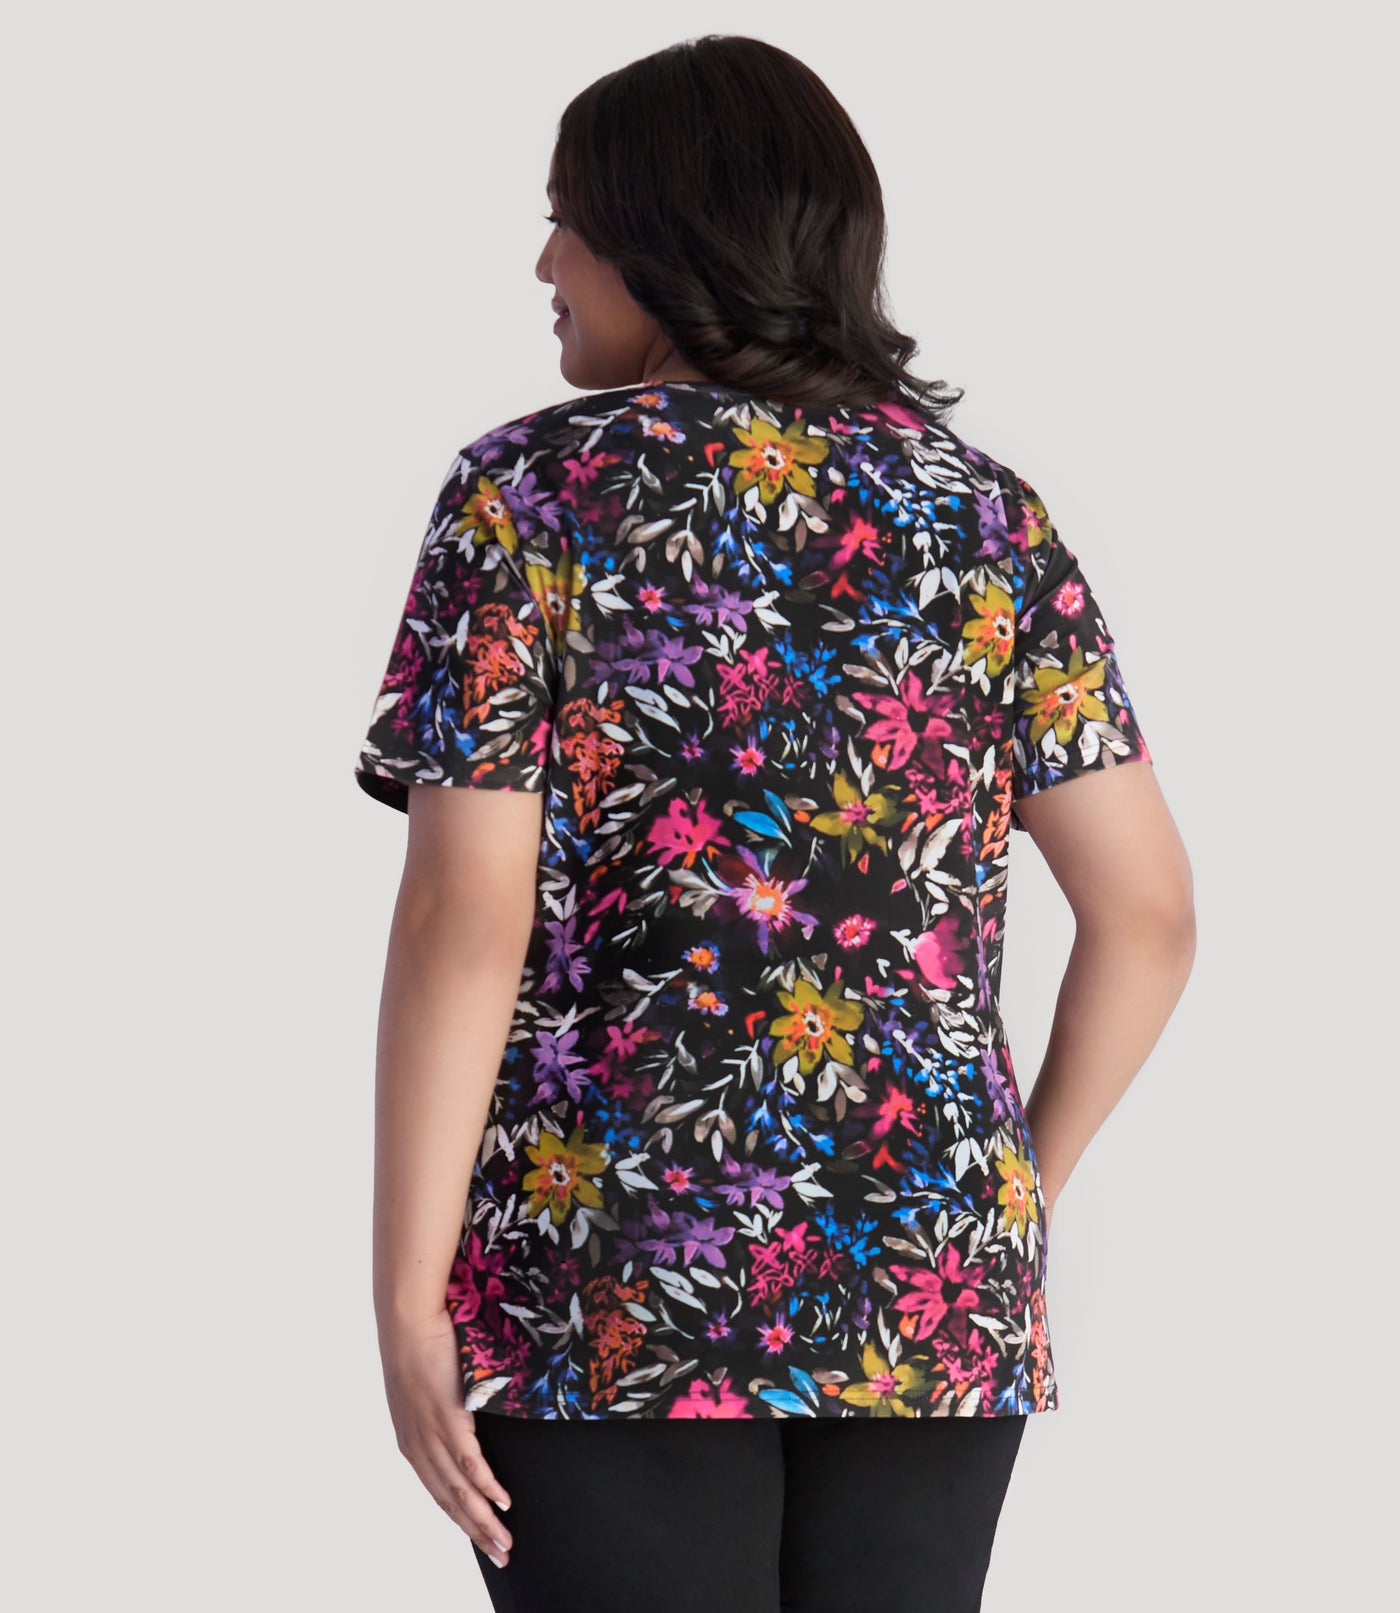 Model, facing back, wearing Junonia Lifestyle Printed Short Sleeve V-Neck top in floral forest print.